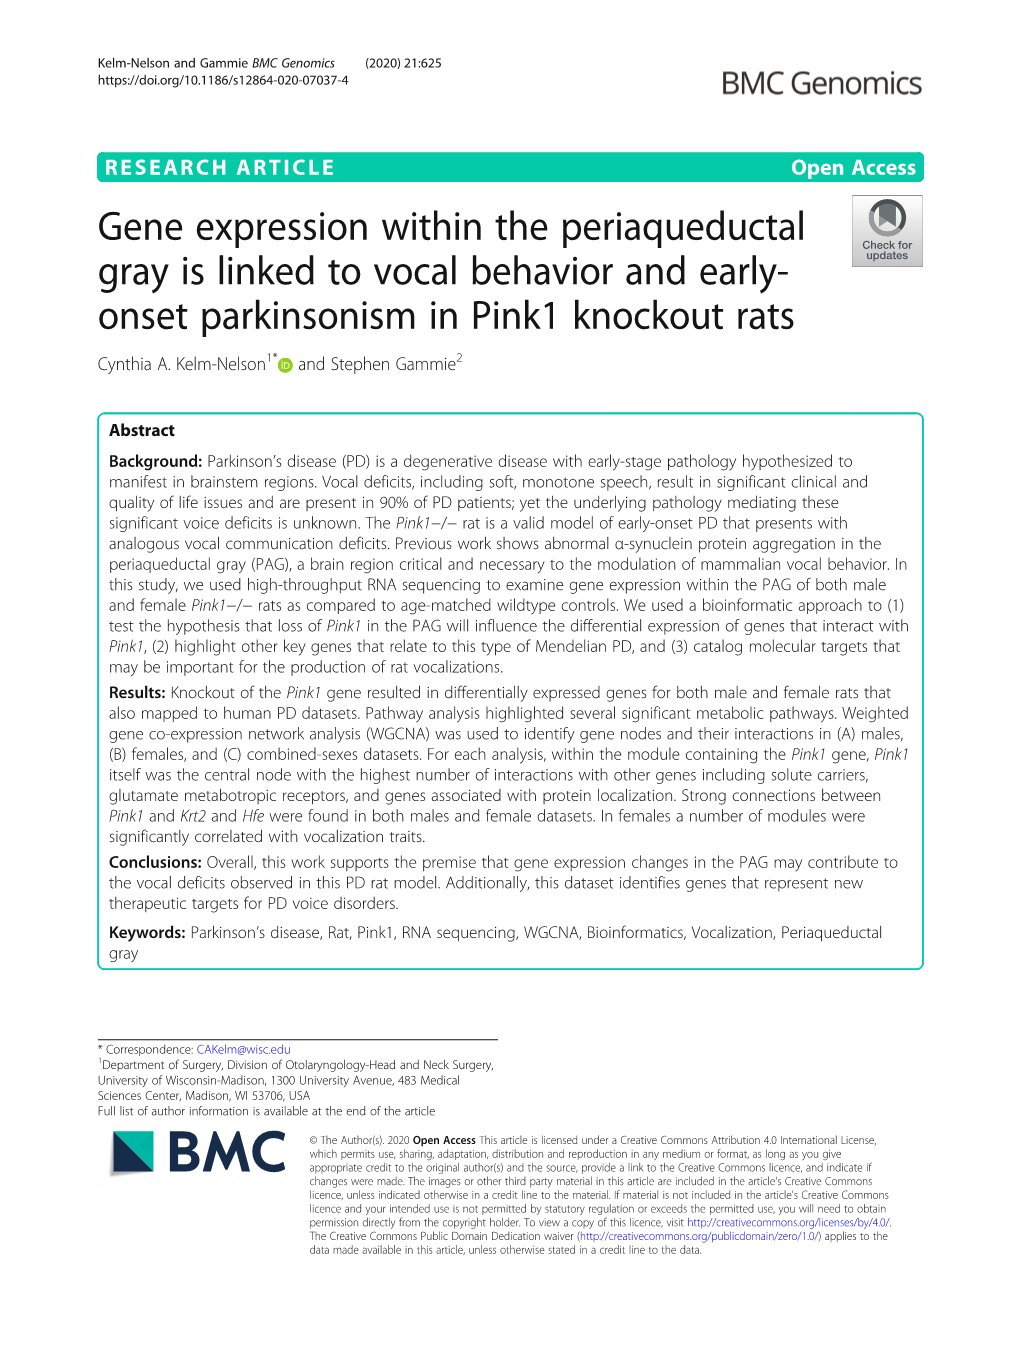 Gene Expression Within the Periaqueductal Gray Is Linked to Vocal Behavior and Early- Onset Parkinsonism in Pink1 Knockout Rats Cynthia A